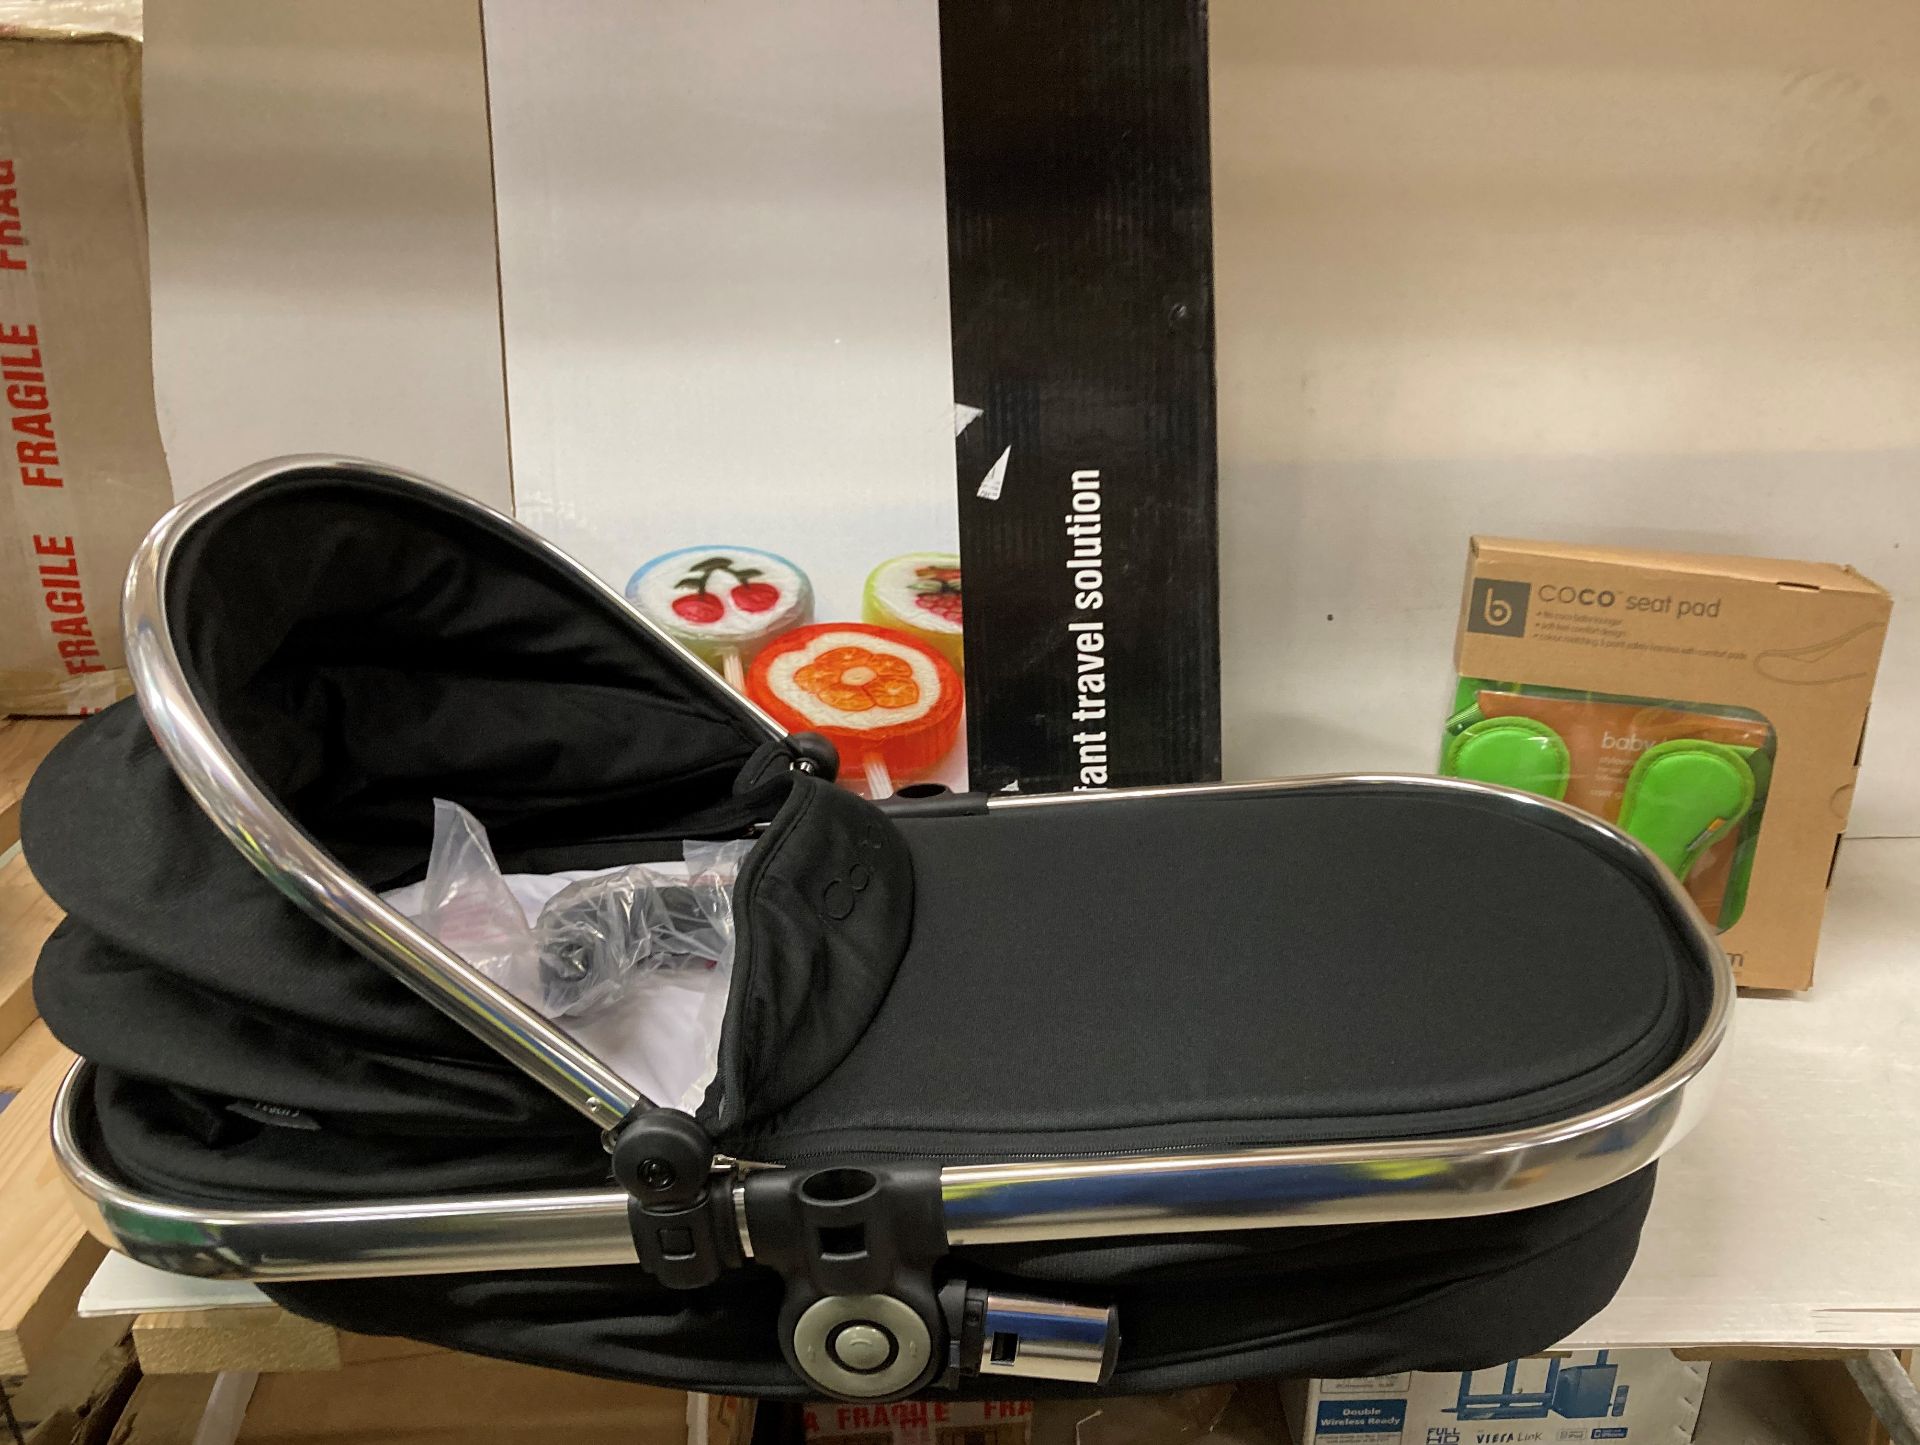 2 x items - iCandy carry cot in black and chrome and a Coco seat pad (F07) Further